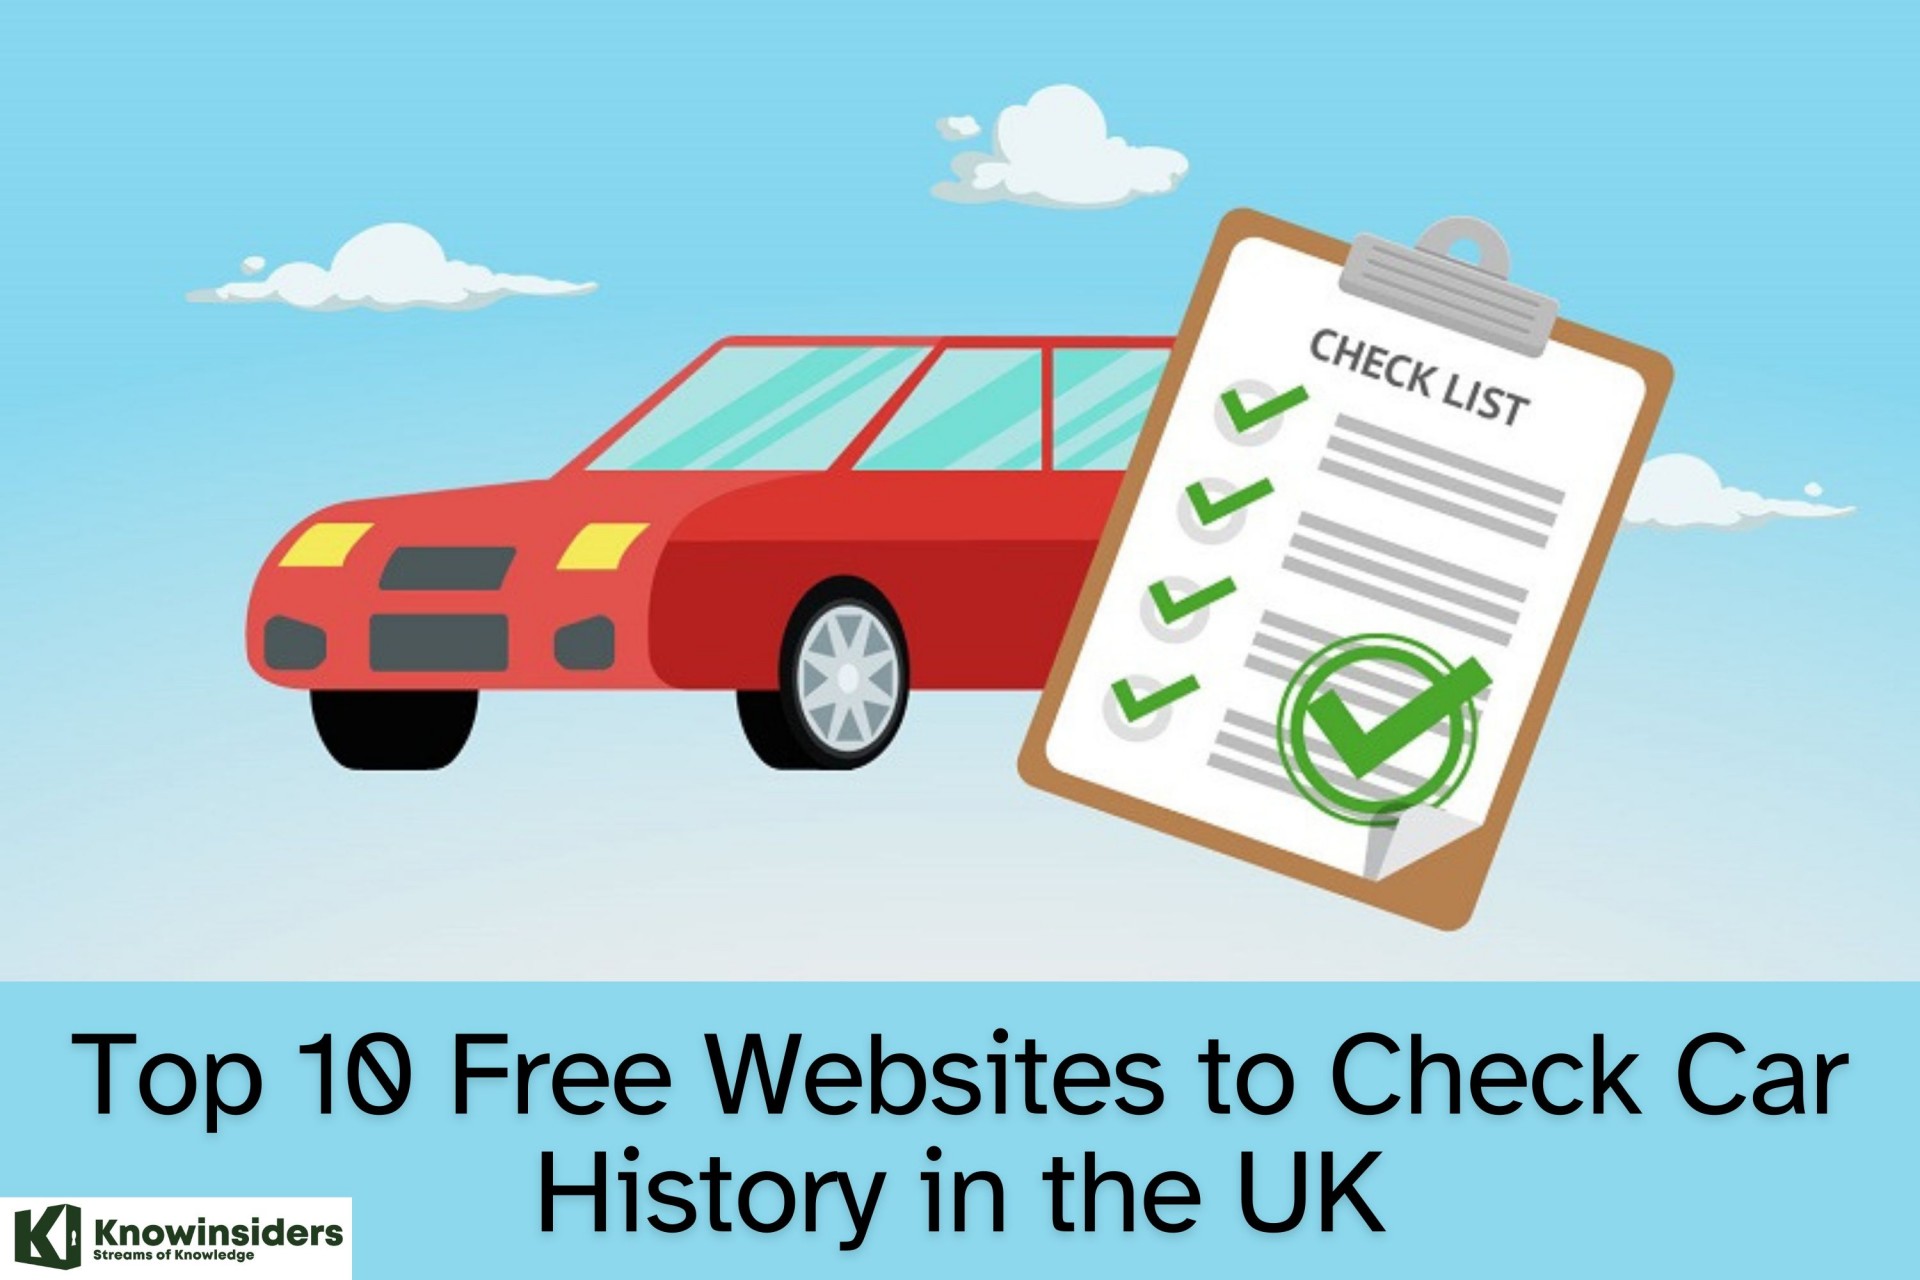 How to Check A Car History in the U.K - Top 10 Free Sites to Find the VIN/VRN/MOT